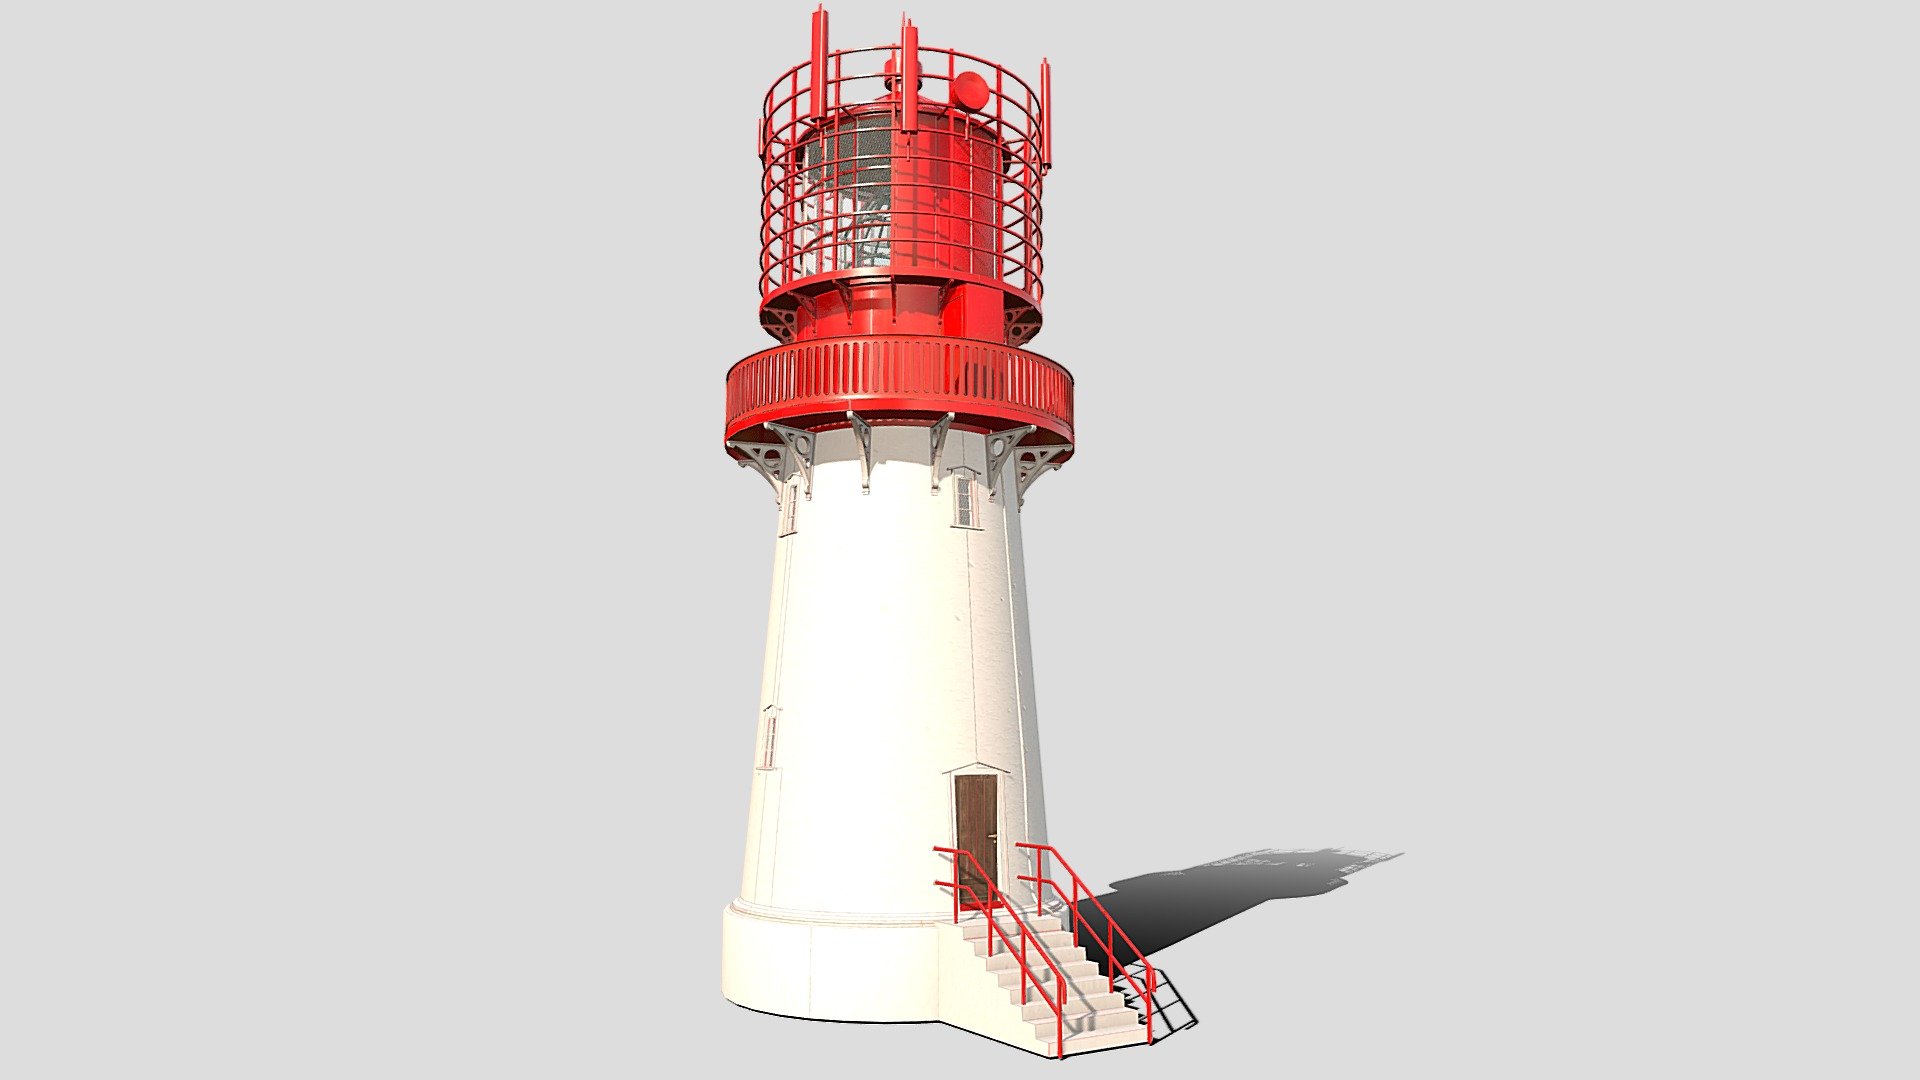 A lighthouse is a tall structure equipped with a light at the top, often located on coastlines or dangerous areas at sea, to guide and warn ships by emitting a distinctive, visible signal. Light House 3d model with realistic 4k textures 3d model